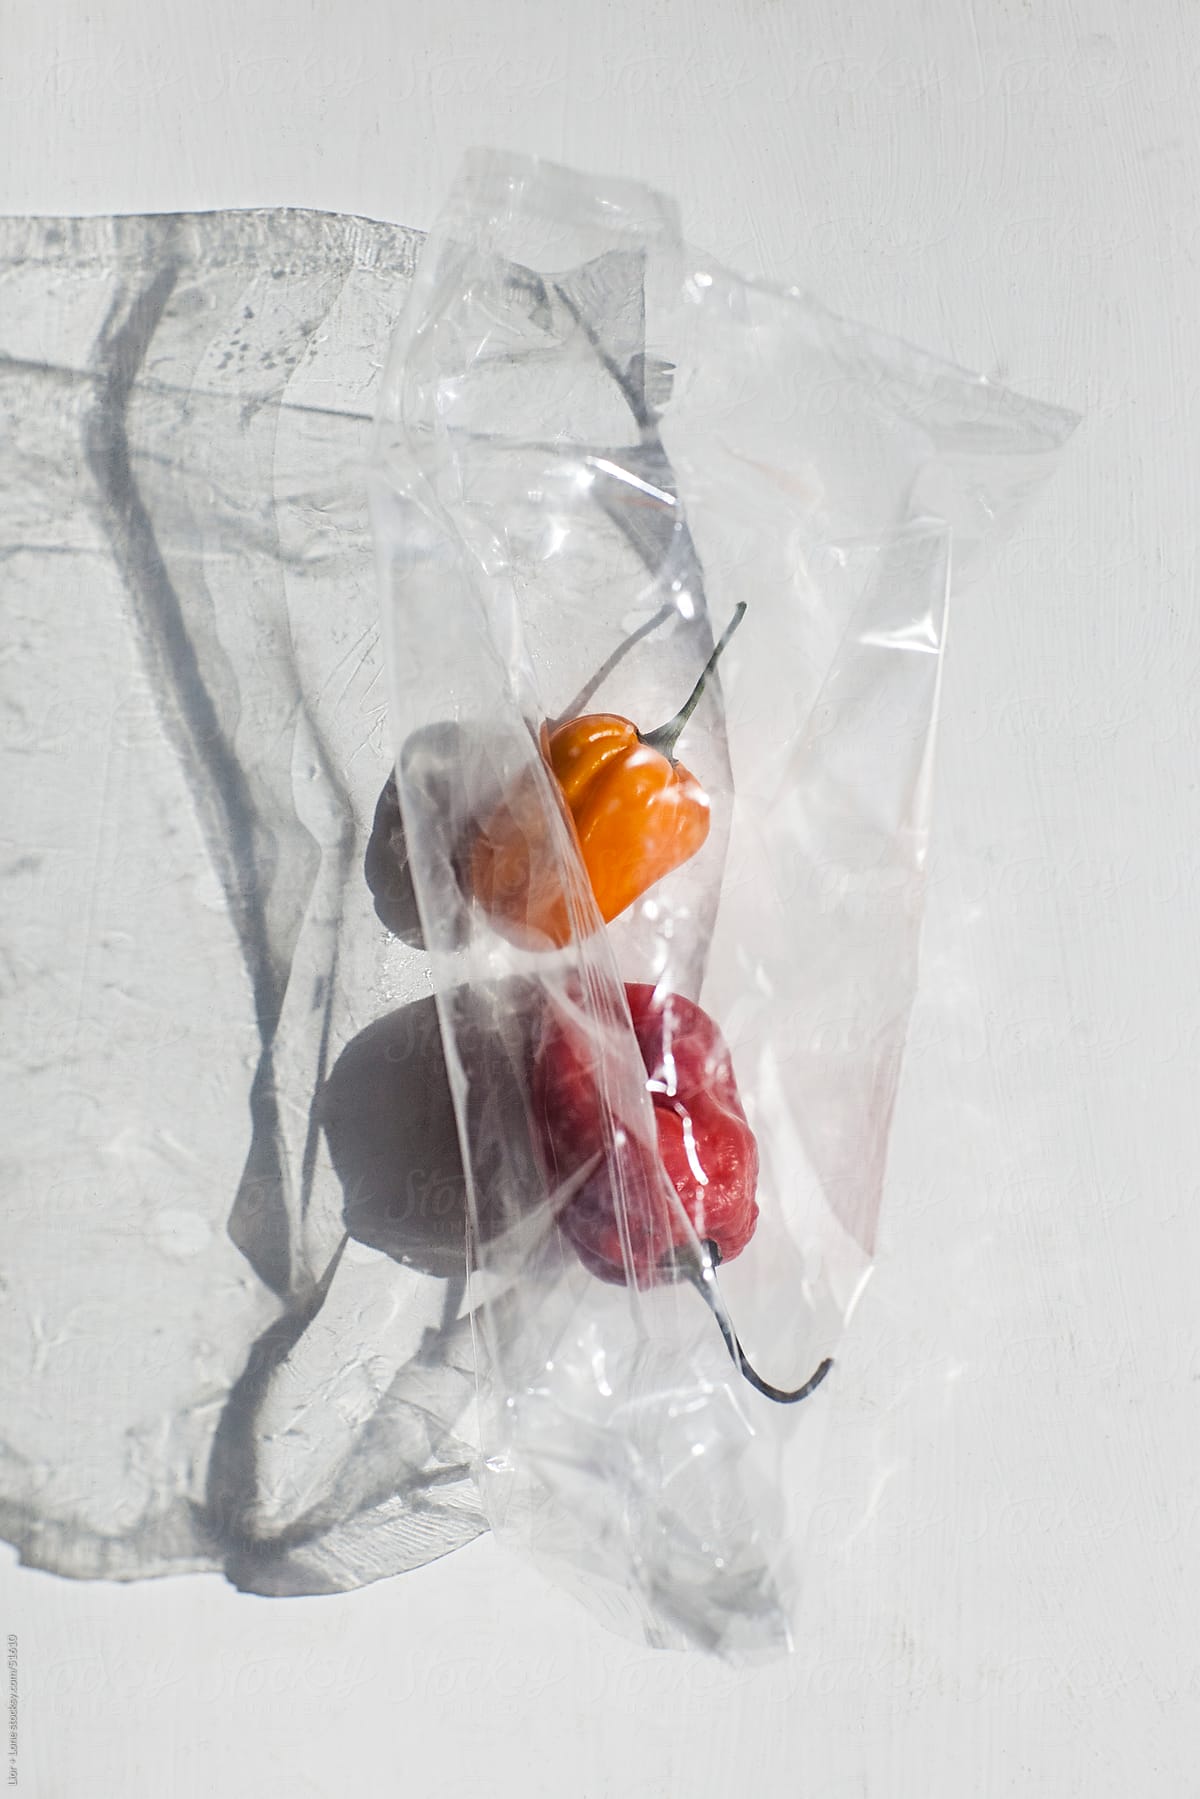 red and yellow habanero chilies in cellophane wrapping